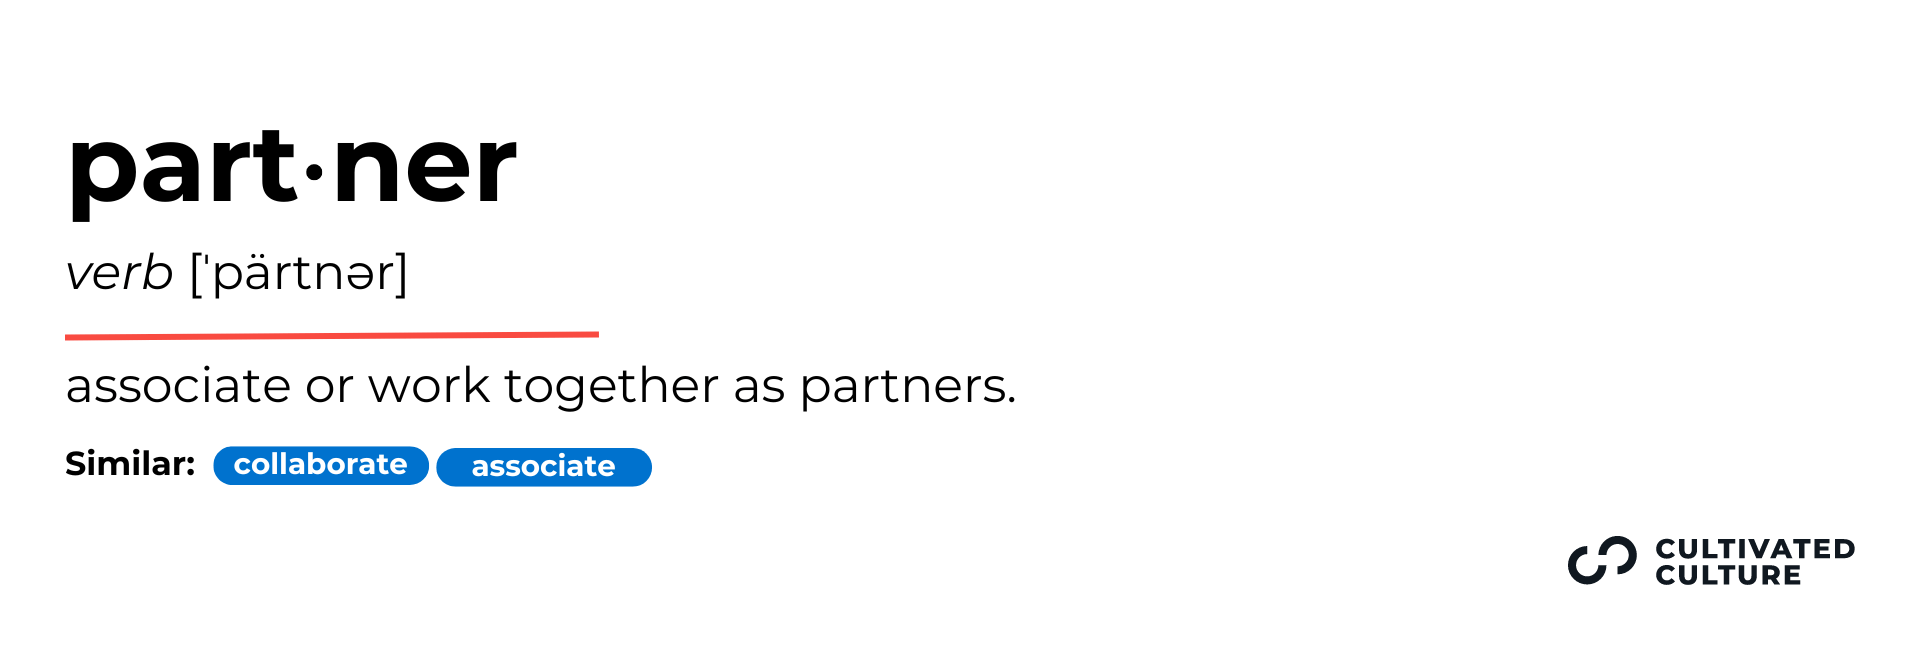 Partner - Another Word For Collaborate